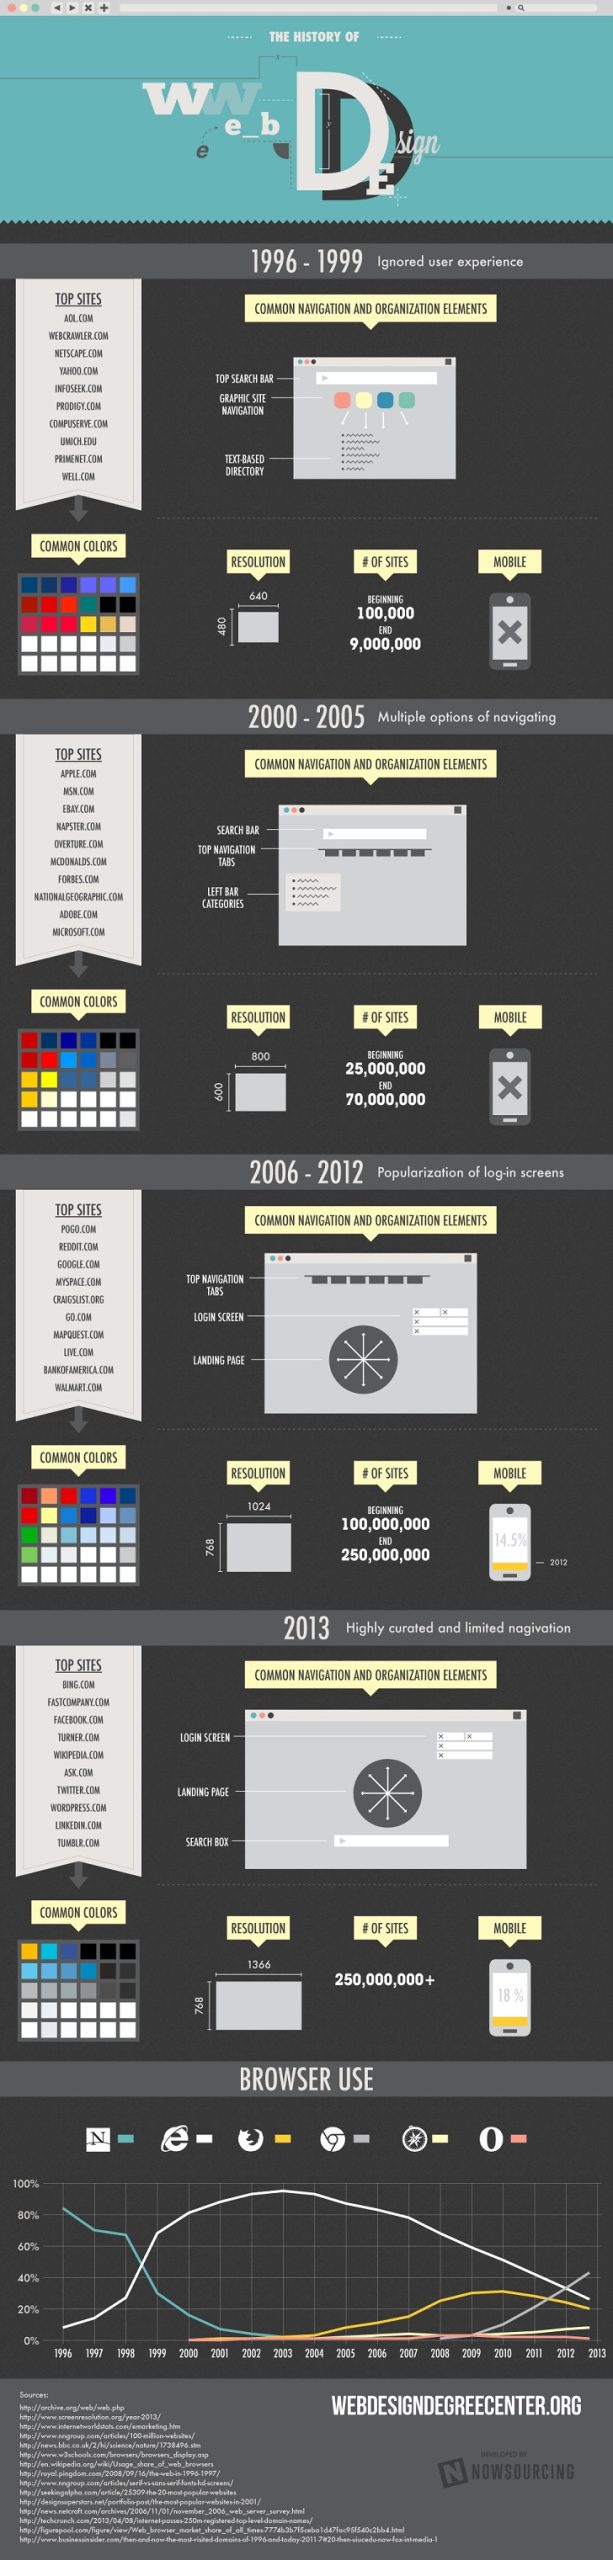 History of Web Design Infographic